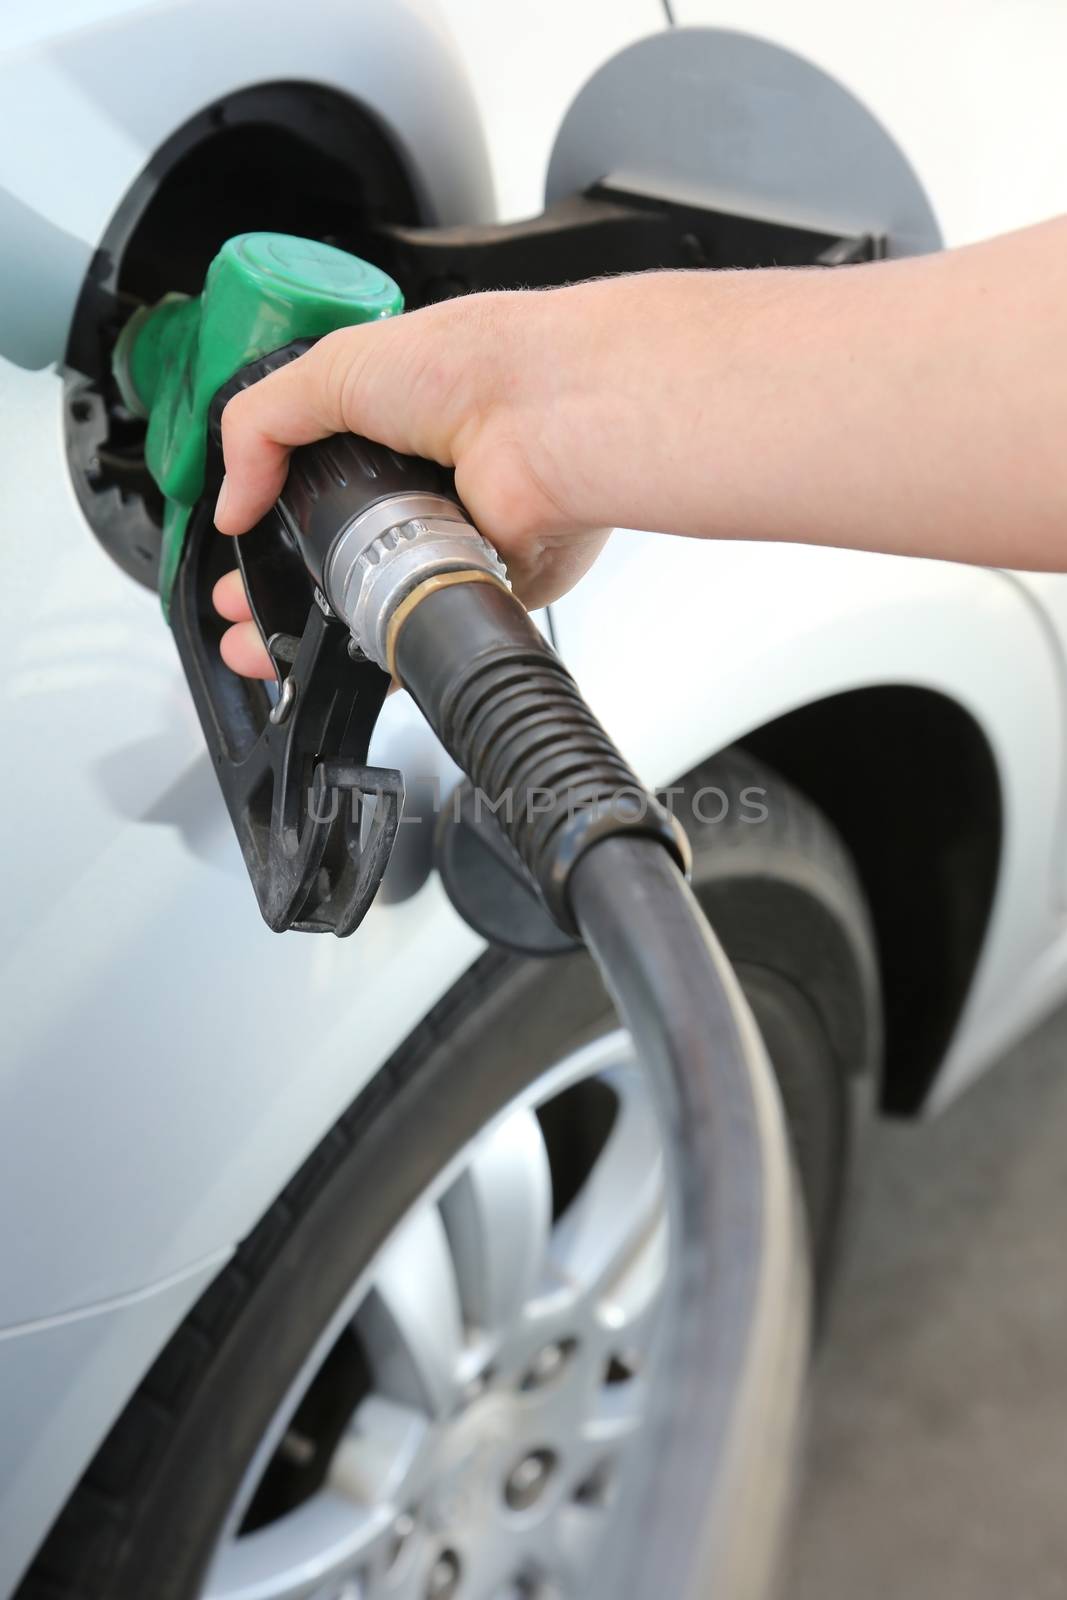 Petrol or gasoline being pumped into a motor vehicle car